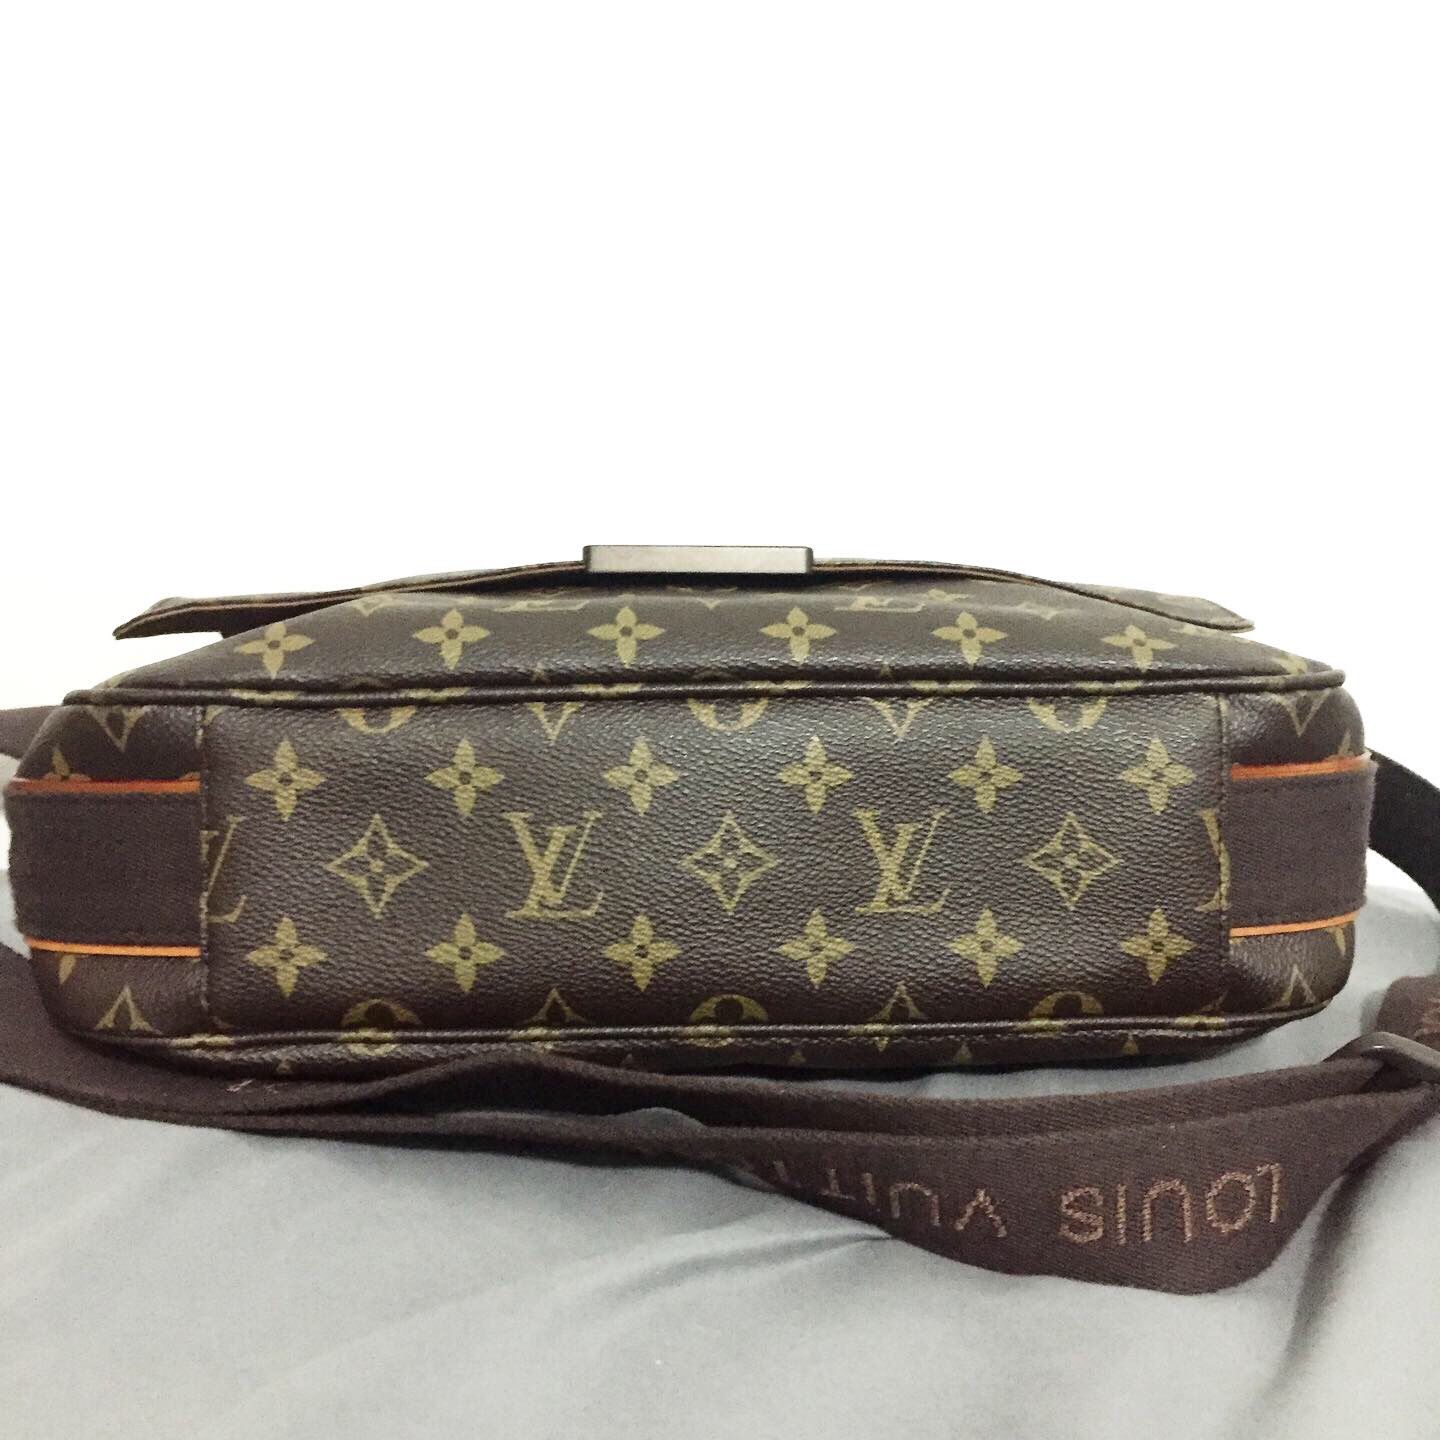 Authentic LV Messenger: Discounted 185606/1 | Rebag